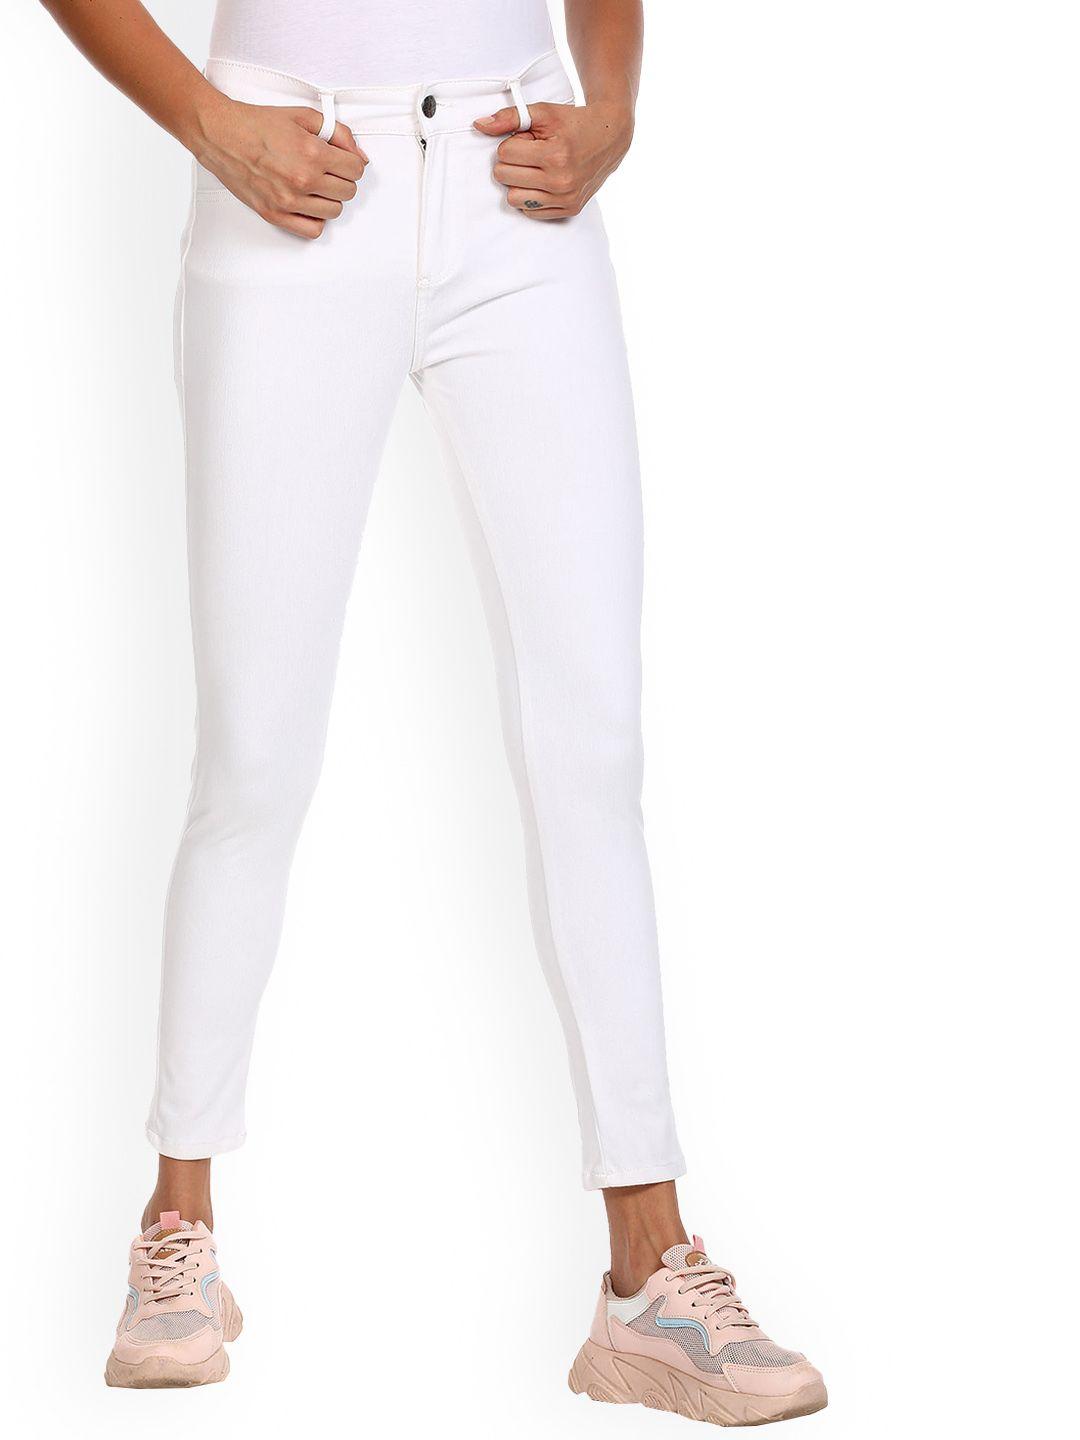 sugr-women-white-solid-mid-rise-jeggings